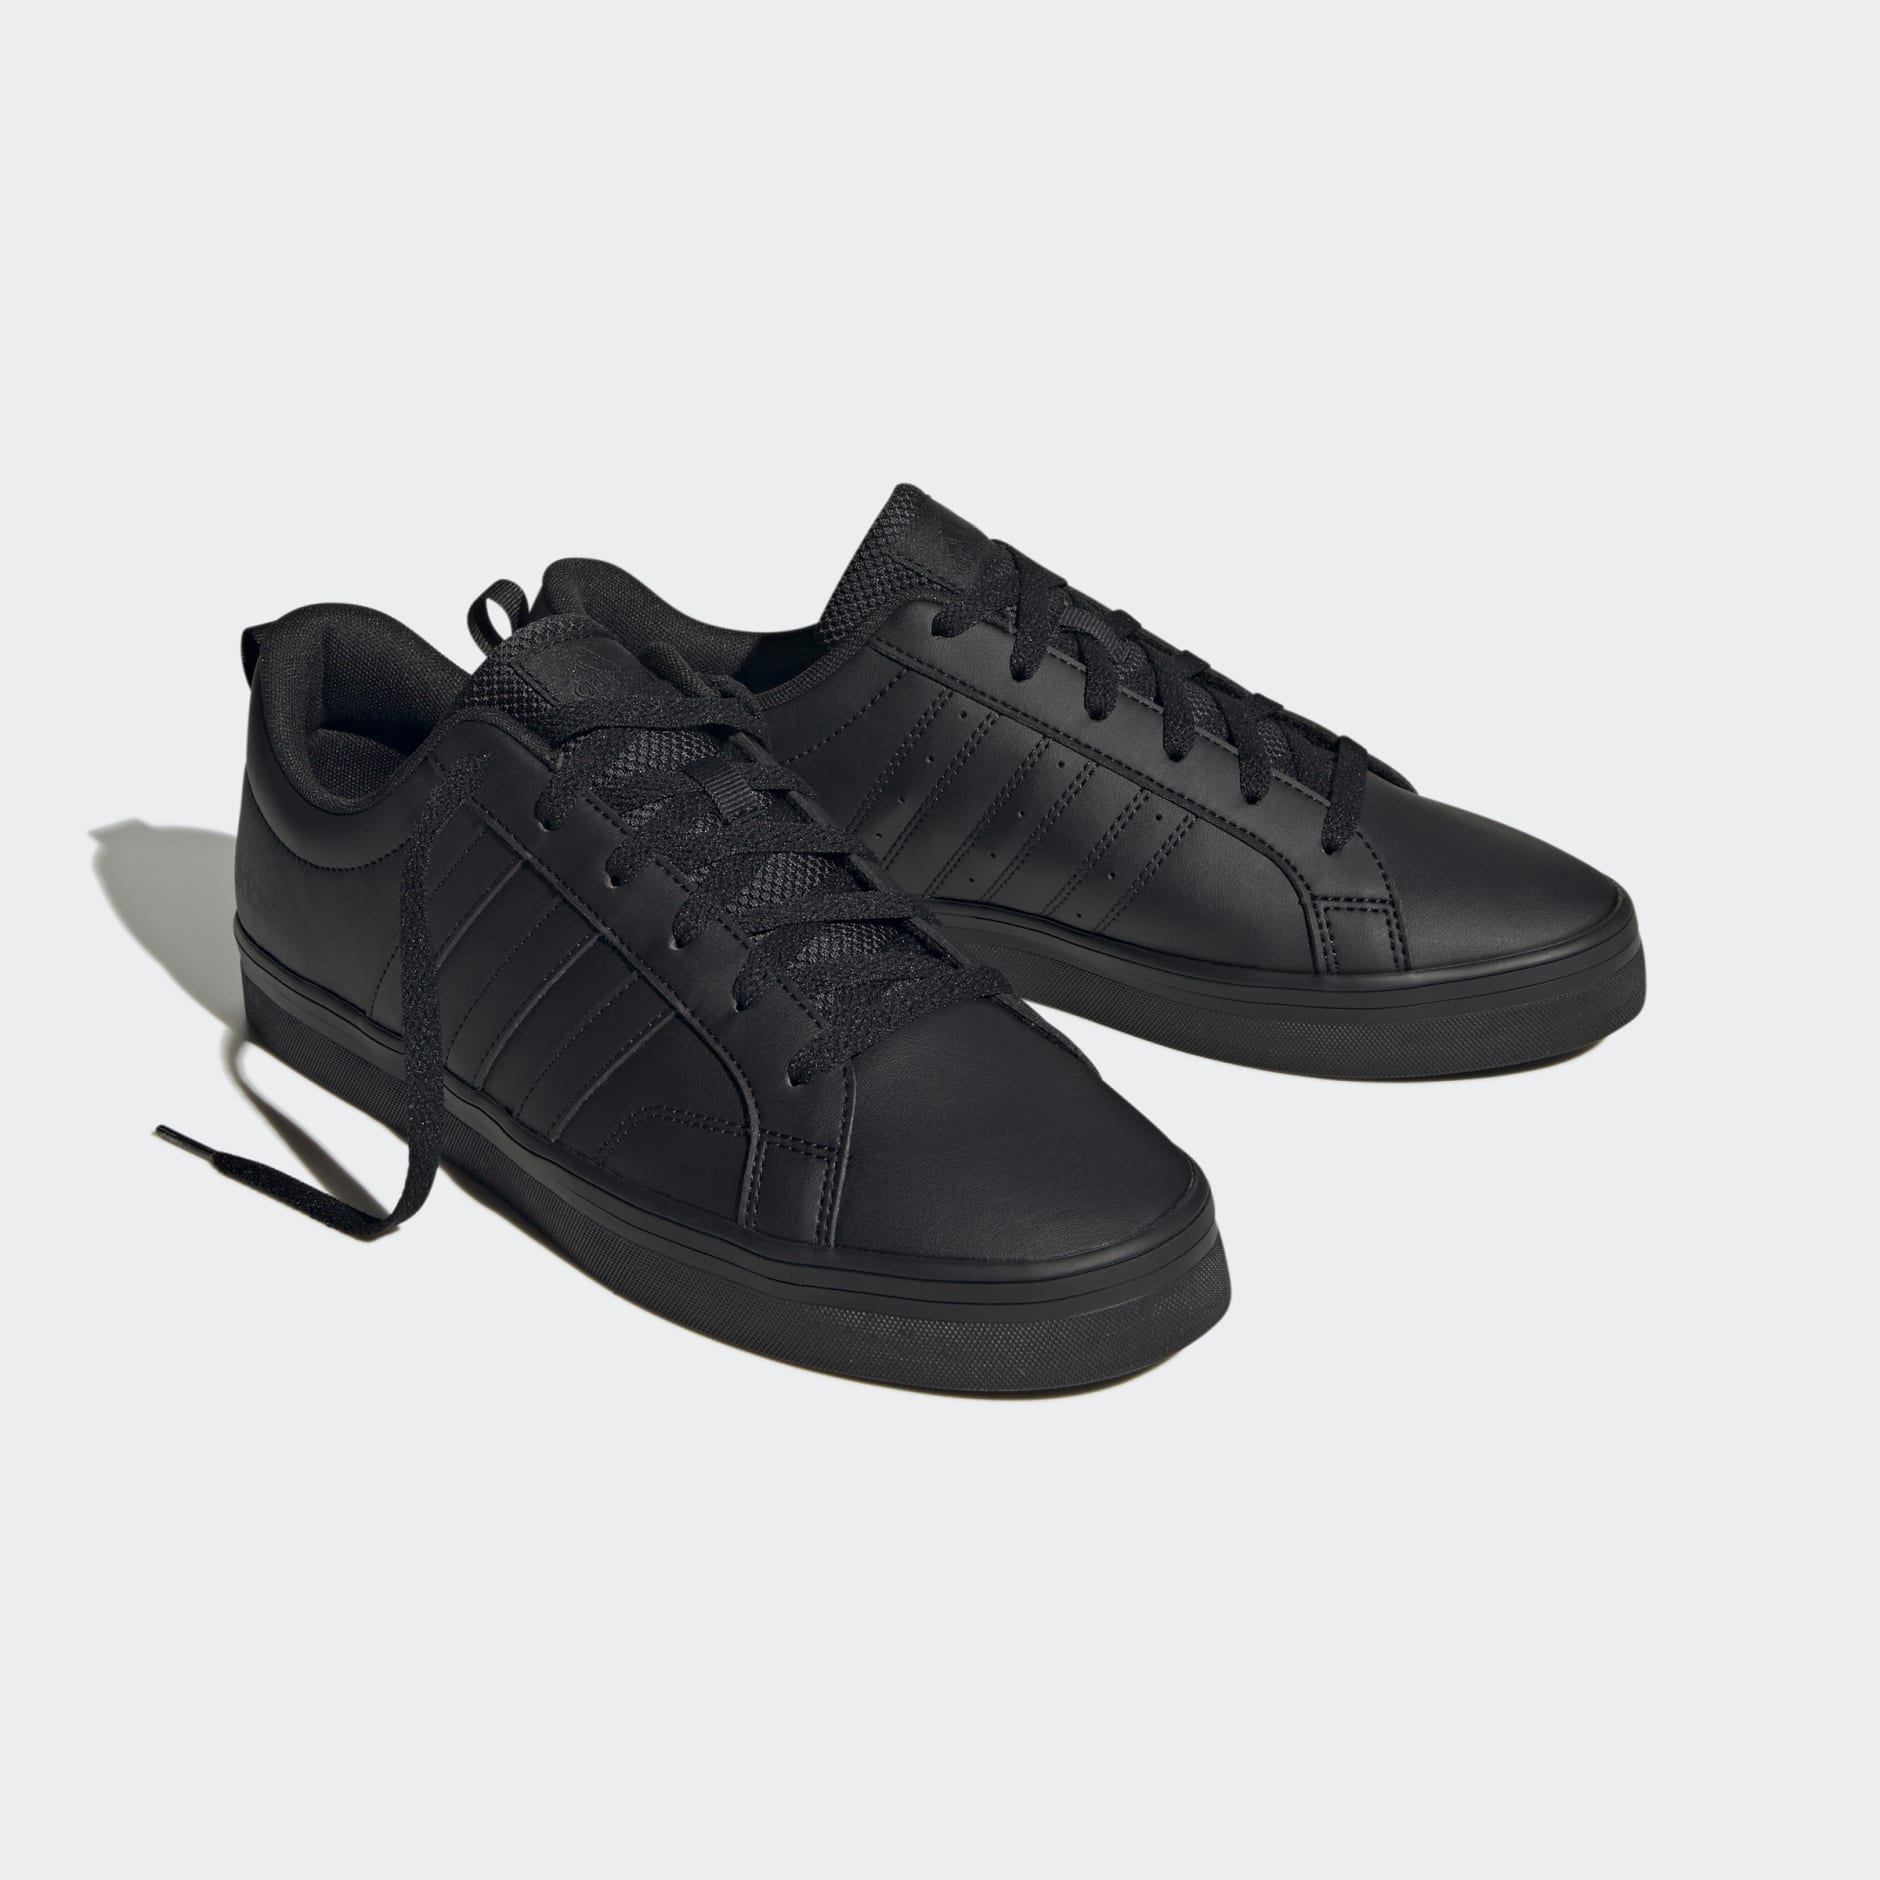 Shoes - VS Pace 2.0 Shoes - Black | adidas South Africa